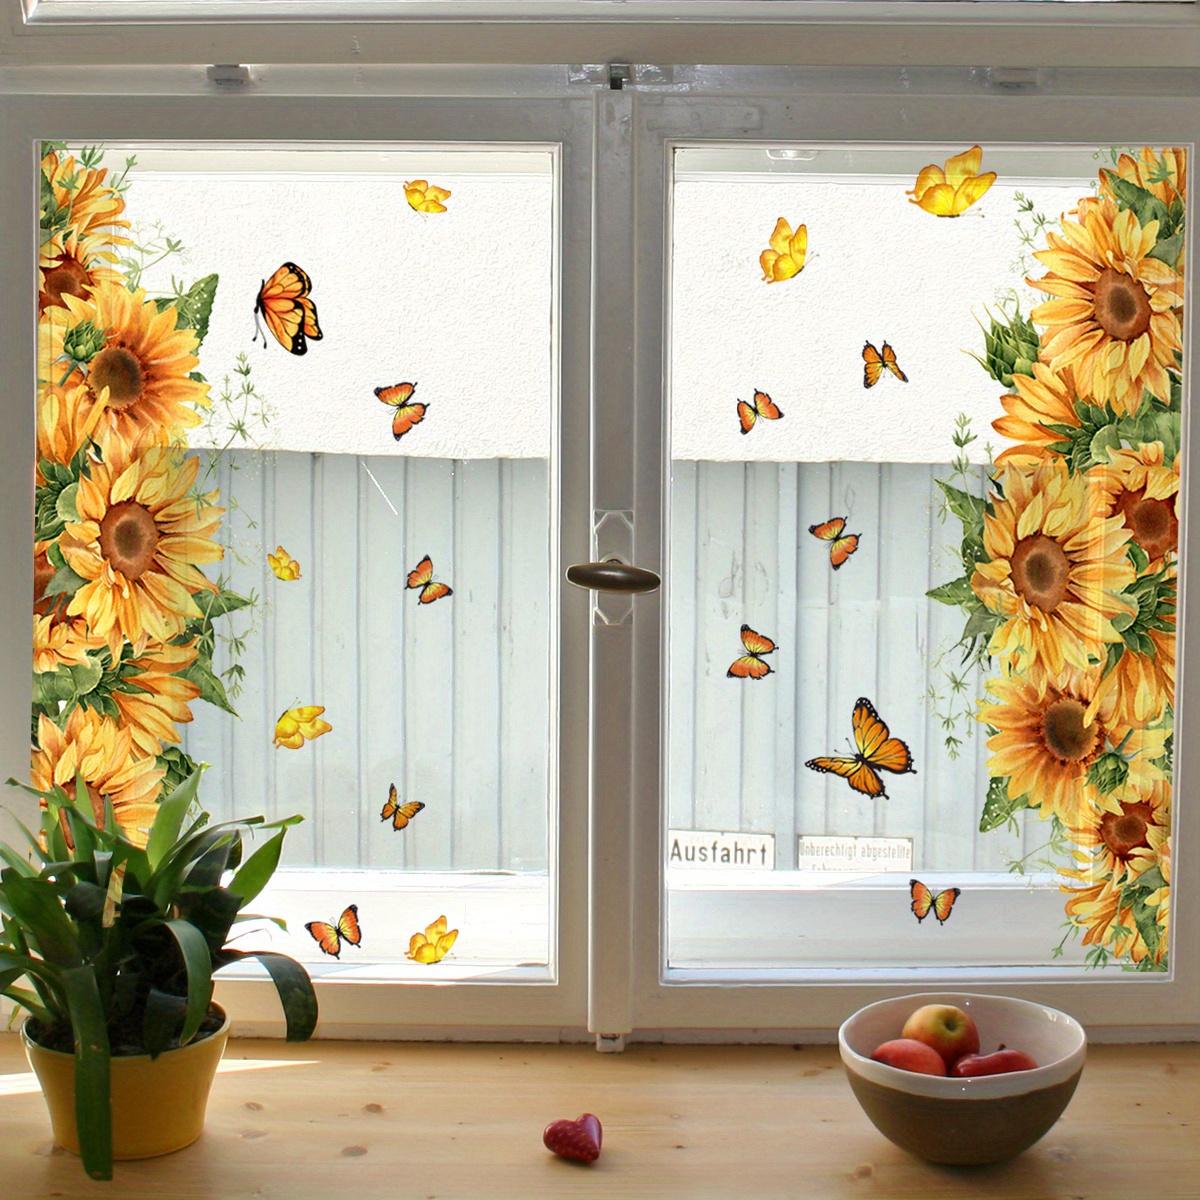 

Sunflower Butterfly Static Window Sticker, Reusable Glass Decals, Double Sided Pattern Removable Sticker, Small Diy Sticker, Home Office Decoration, Living Room Bedroom Window Art Decal